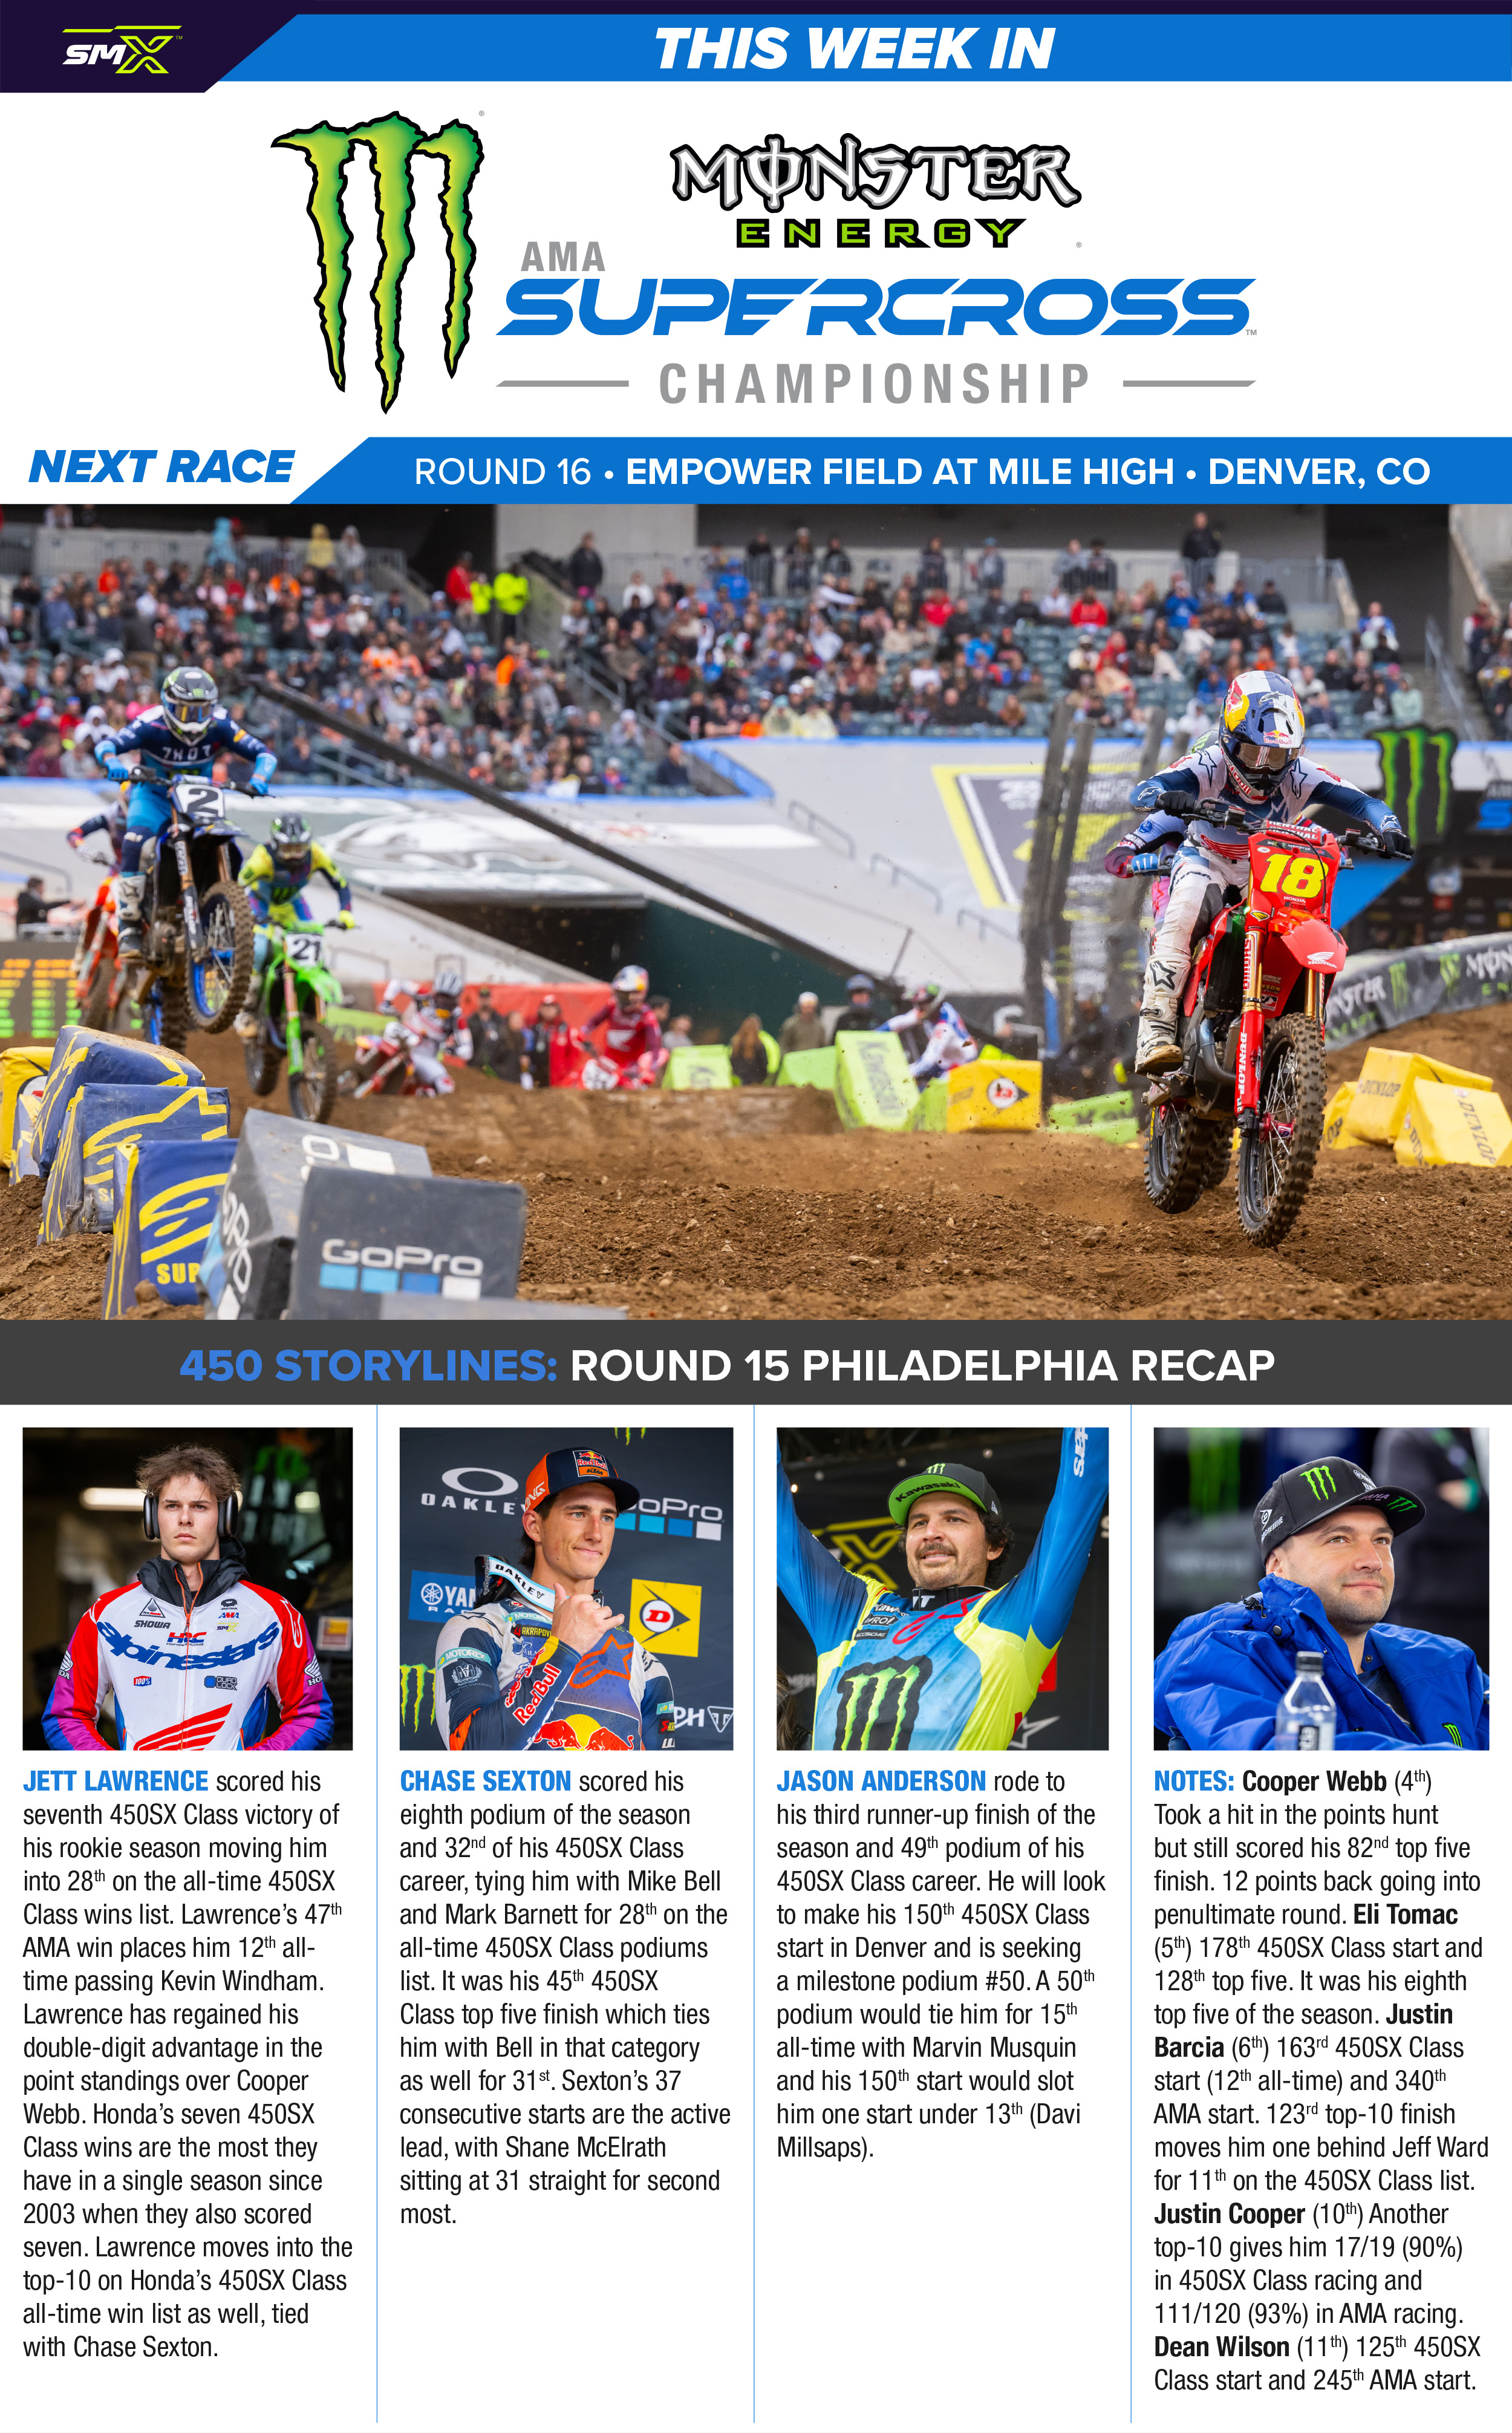 This Week In Supercross- Round 16 In Denver